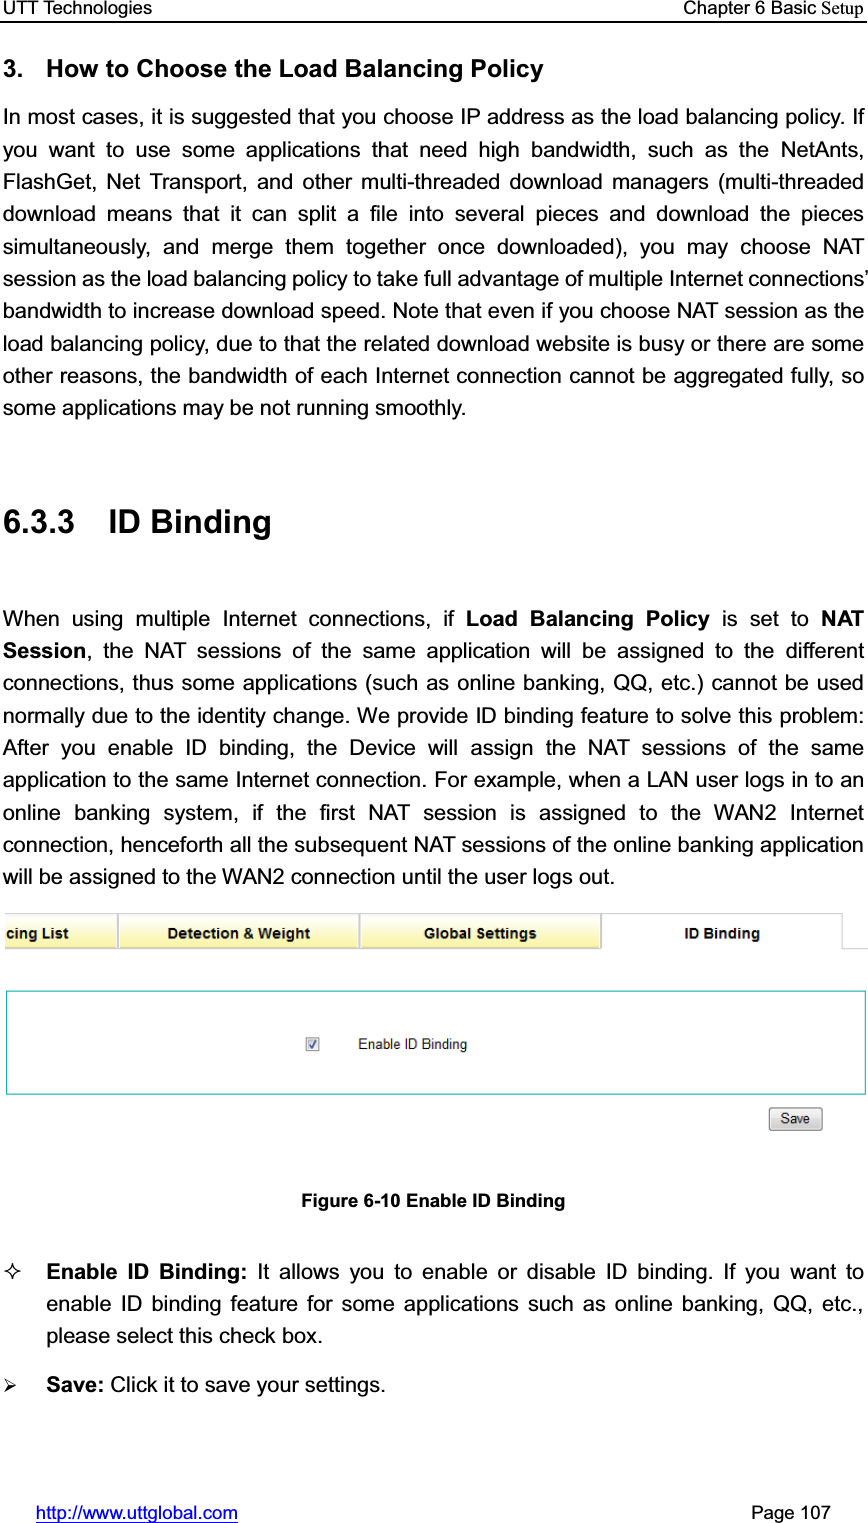 UTT Technologies    Chapter 6 Basic Setuphttp://www.uttglobal.com                                                       Page 107 3.  How to Choose the Load Balancing Policy In most cases, it is suggested that you choose IP address as the load balancing policy. If you want to use some applications that need high bandwidth, such as the NetAnts, FlashGet, Net Transport, and other multi-threaded download managers (multi-threaded download means that it can split a file into several pieces and download the pieces simultaneously, and merge them together once downloaded), you may choose NAT session as the load balancing policy to take full advantage of multiple Internet connections¶bandwidth to increase download speed. Note that even if you choose NAT session as the load balancing policy, due to that the related download website is busy or there are some other reasons, the bandwidth of each Internet connection cannot be aggregated fully, so some applications may be not running smoothly.   6.3.3 ID Binding When using multiple Internet connections, if Load Balancing Policy is set to NAT Session, the NAT sessions of the same application will be assigned to the different connections, thus some applications (such as online banking, QQ, etc.) cannot be used normally due to the identity change. We provide ID binding feature to solve this problem: After you enable ID binding, the Device will assign the NAT sessions of the same application to the same Internet connection. For example, when a LAN user logs in to an online banking system, if the first NAT session is assigned to the WAN2 Internet connection, henceforth all the subsequent NAT sessions of the online banking application will be assigned to the WAN2 connection until the user logs out. Figure 6-10 Enable ID Binding Enable ID Binding: It allows you to enable or disable ID binding. If you want to enable ID binding feature for some applications such as online banking, QQ, etc., please select this check box. ¾Save: Click it to save your settings.